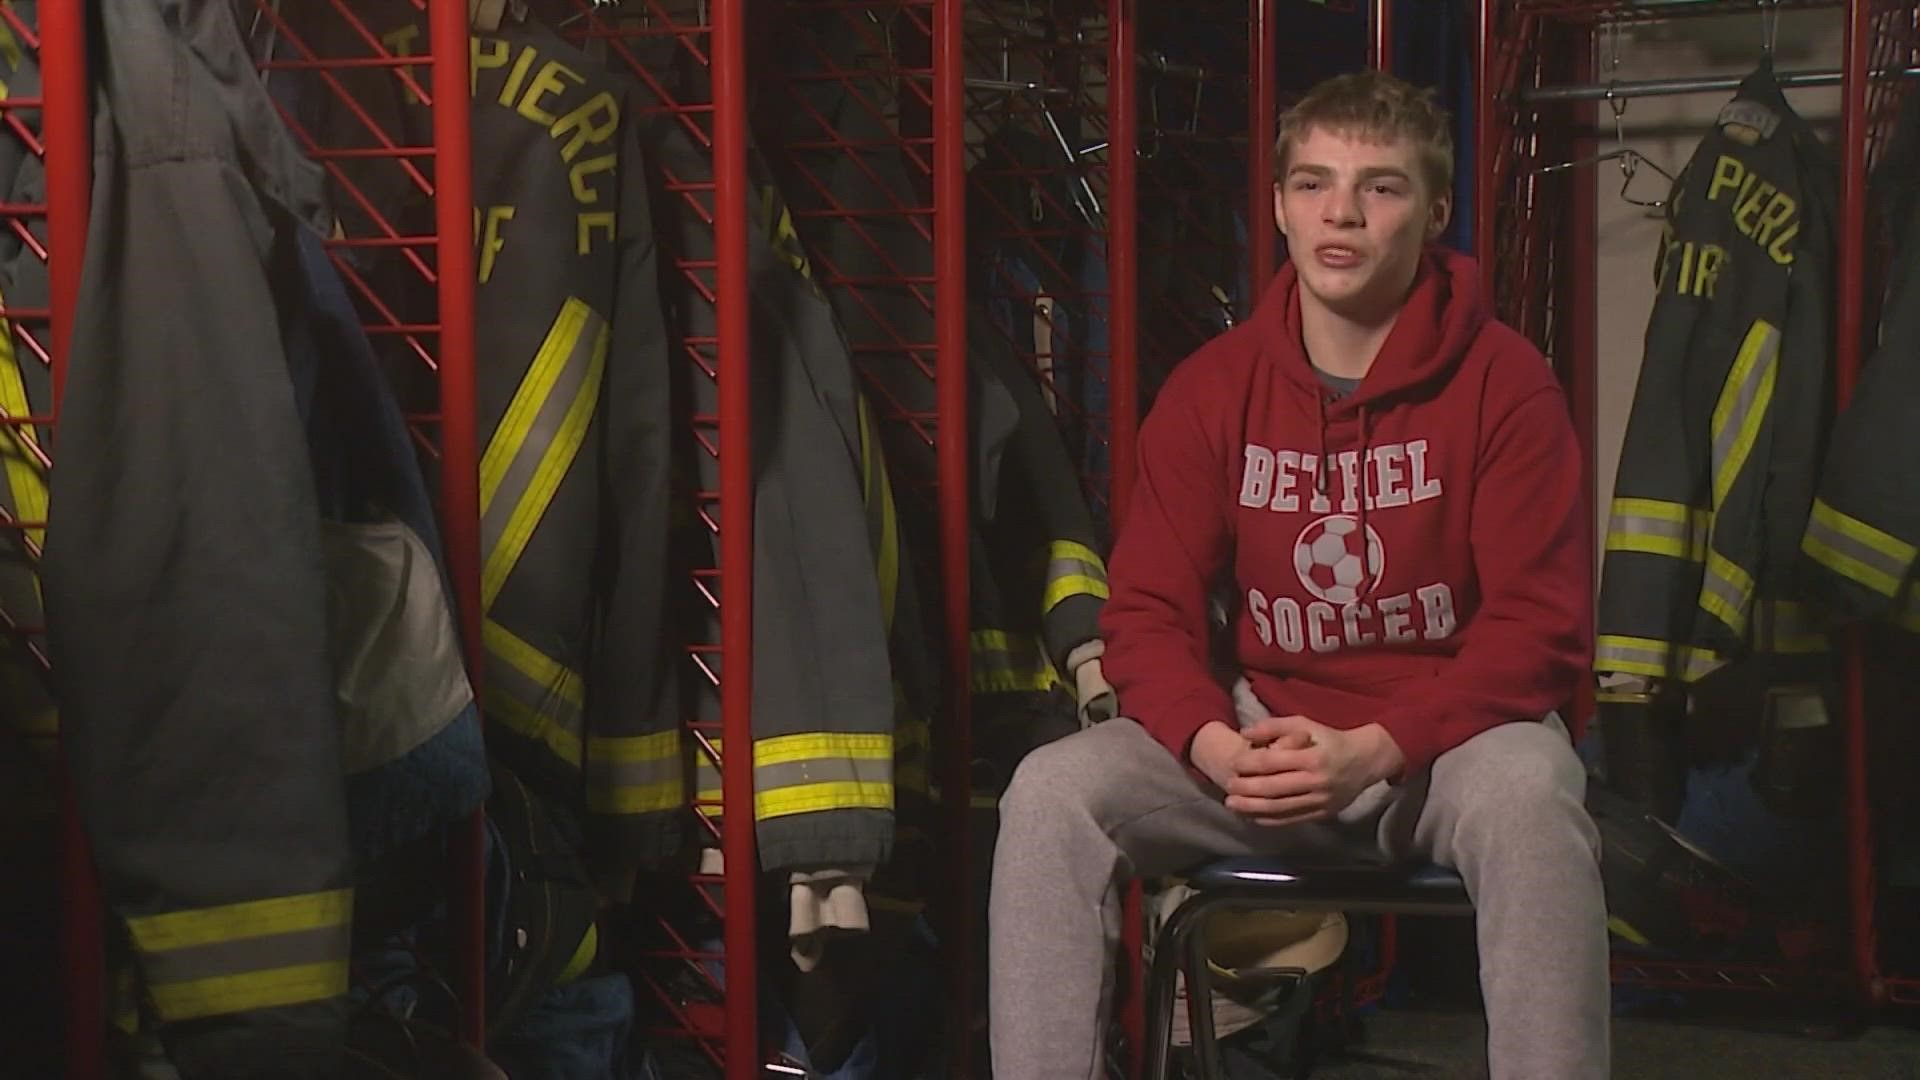 Bethel School District says Tristan Baumann was able to perform a heroic act because of training he received at the Pierce County Skills Center.